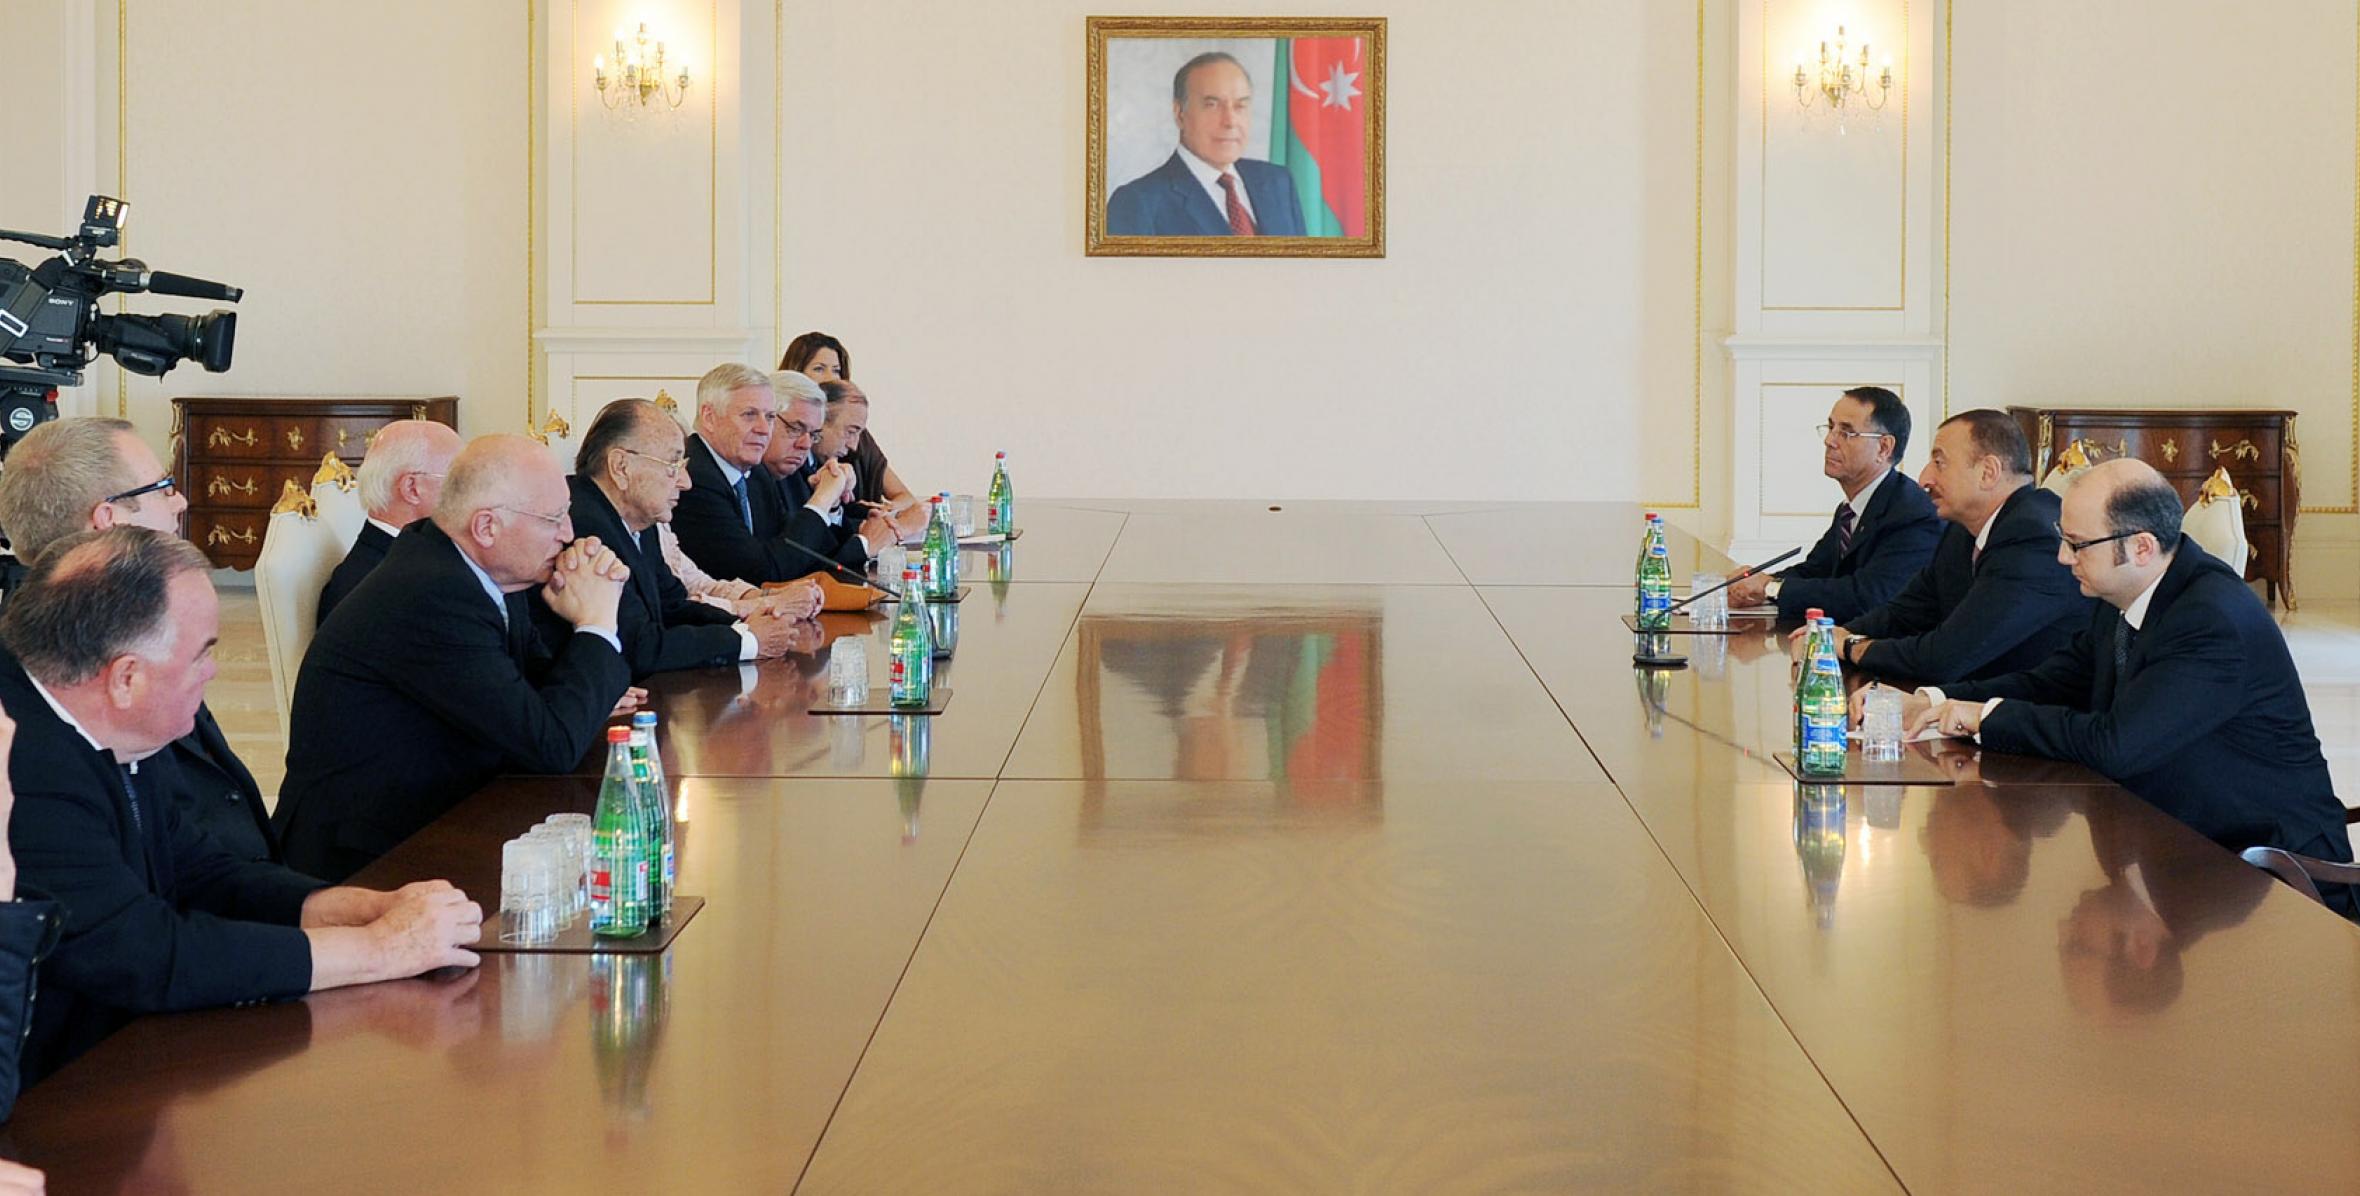 Ilham Aliyev received a delegation led by the former foreign minister of Germany